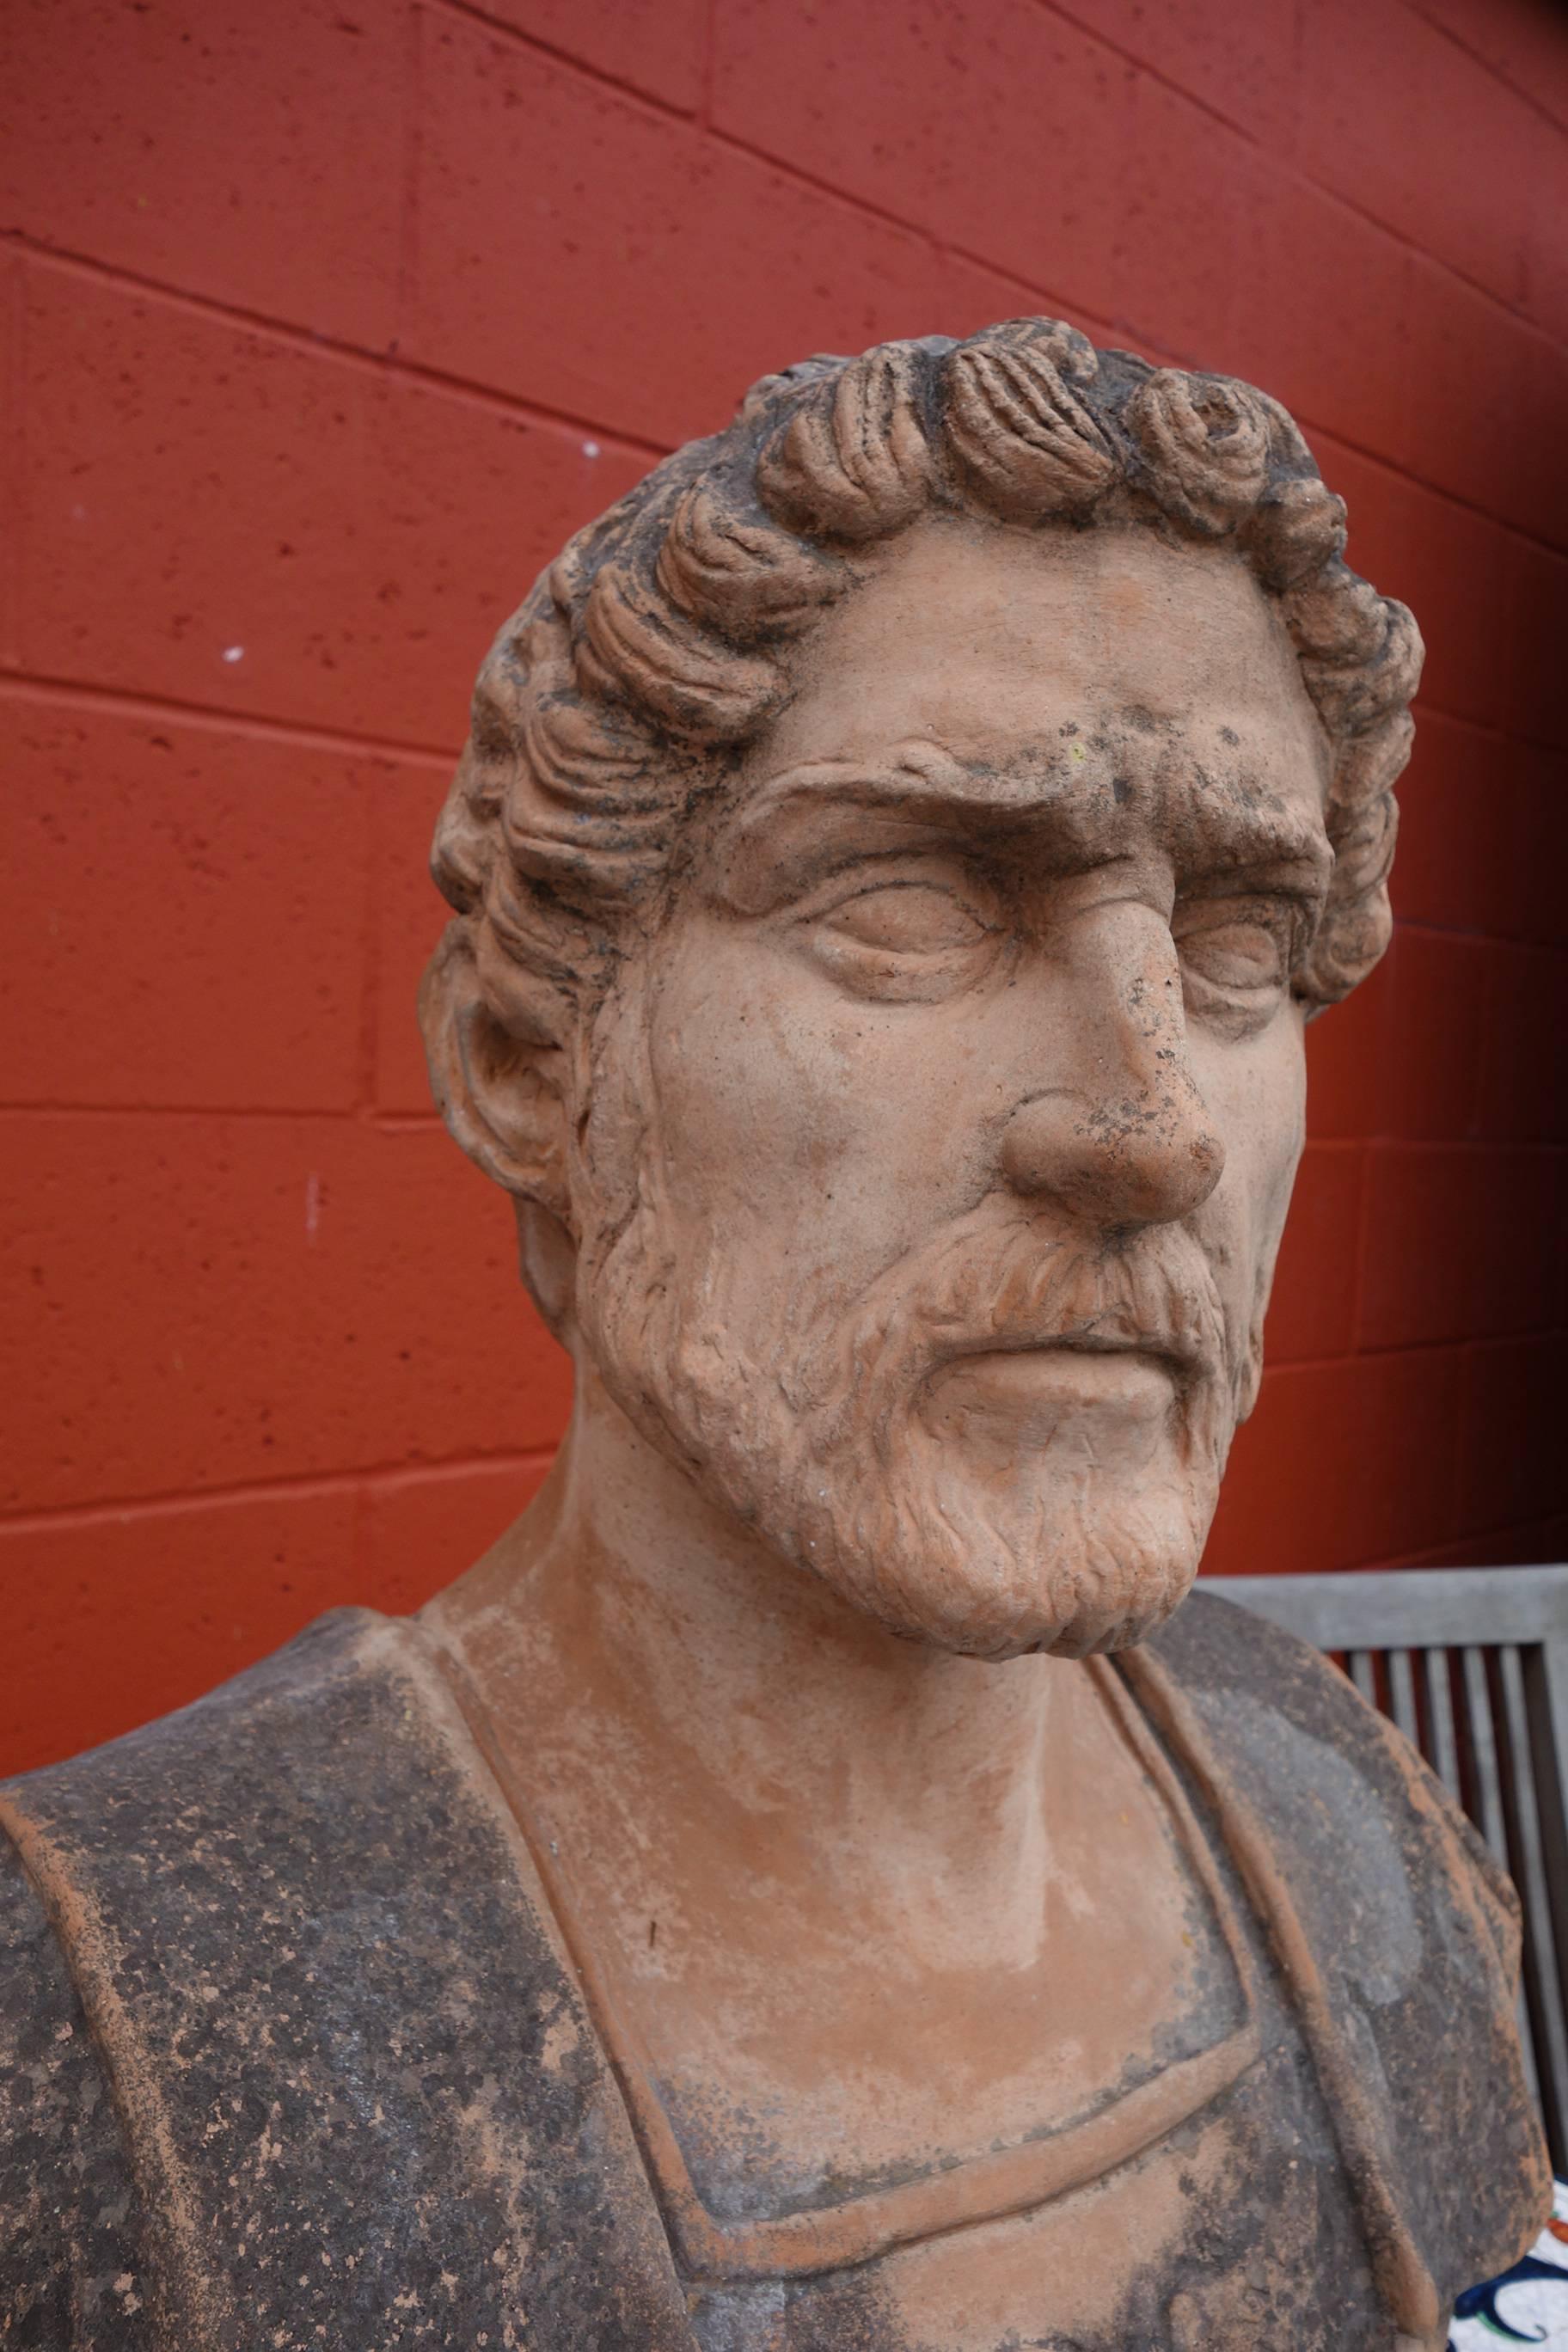 which italian statesman is pictured in the painted terra cotta bust